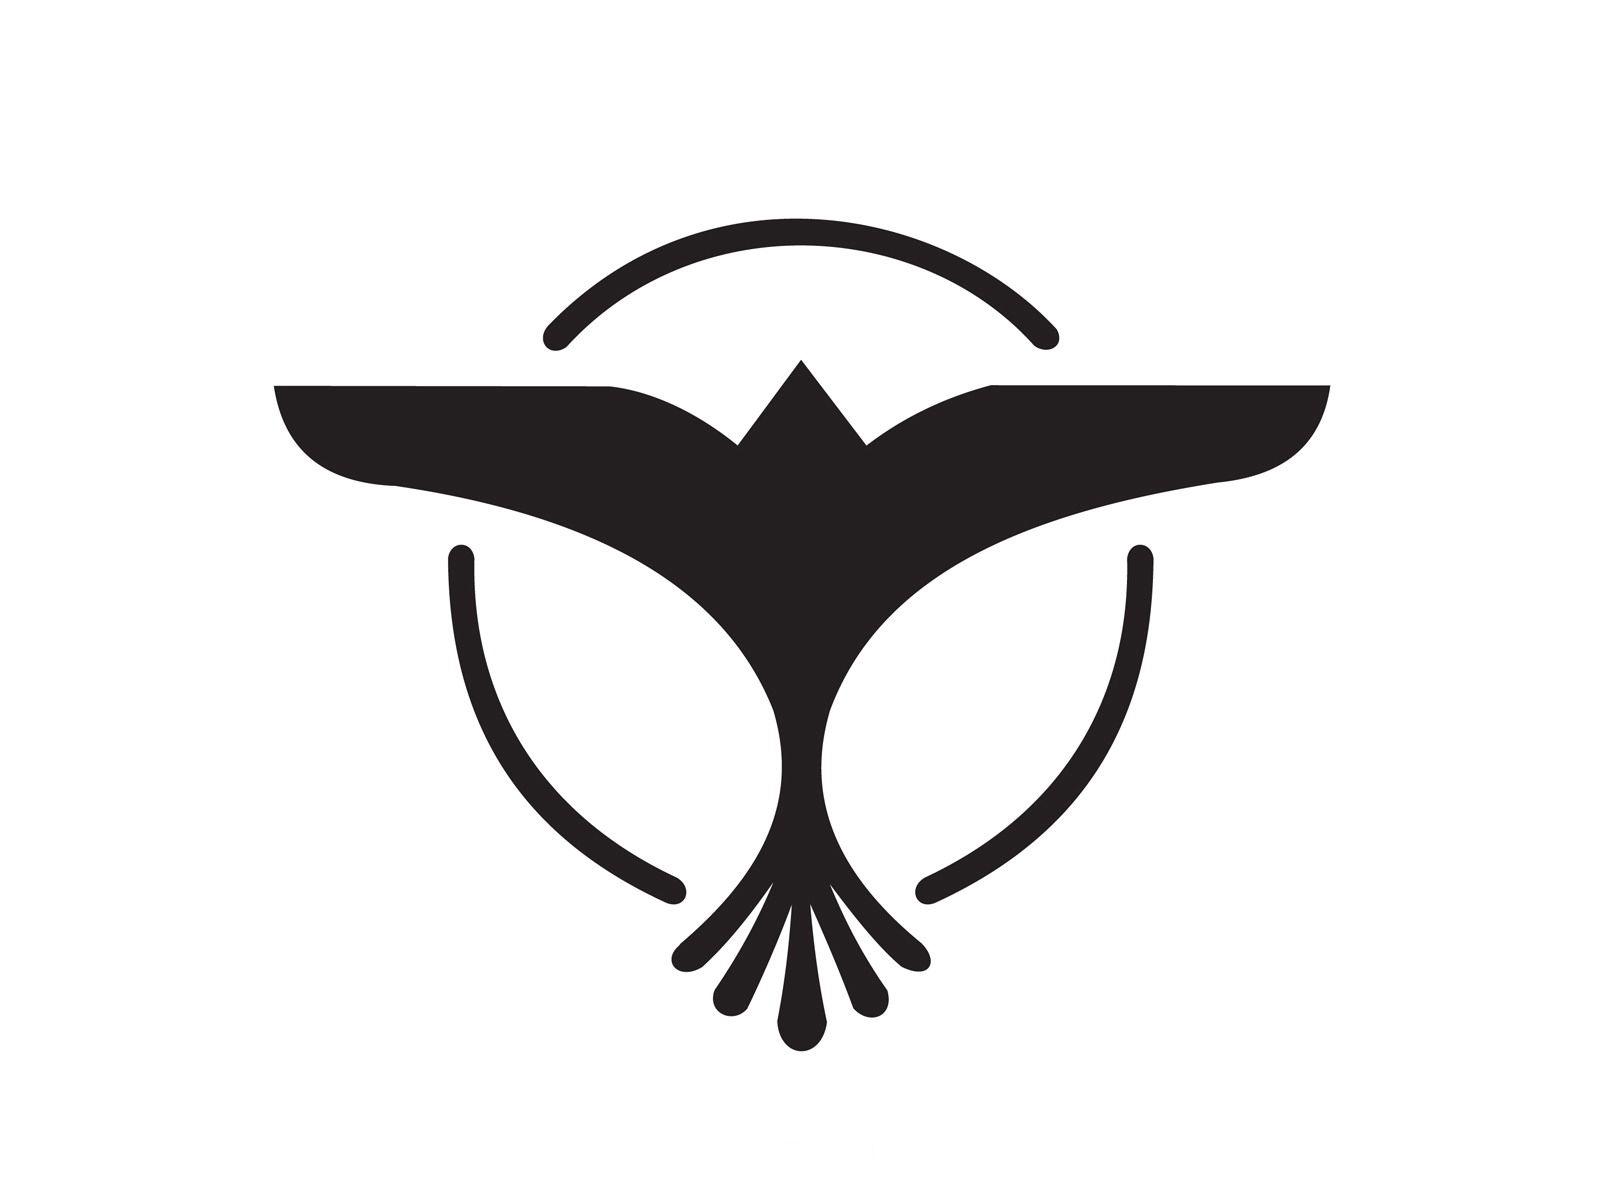 Tiesto Logo - The famous bird logo. Any Tiësto fan will be able to recognise this ...